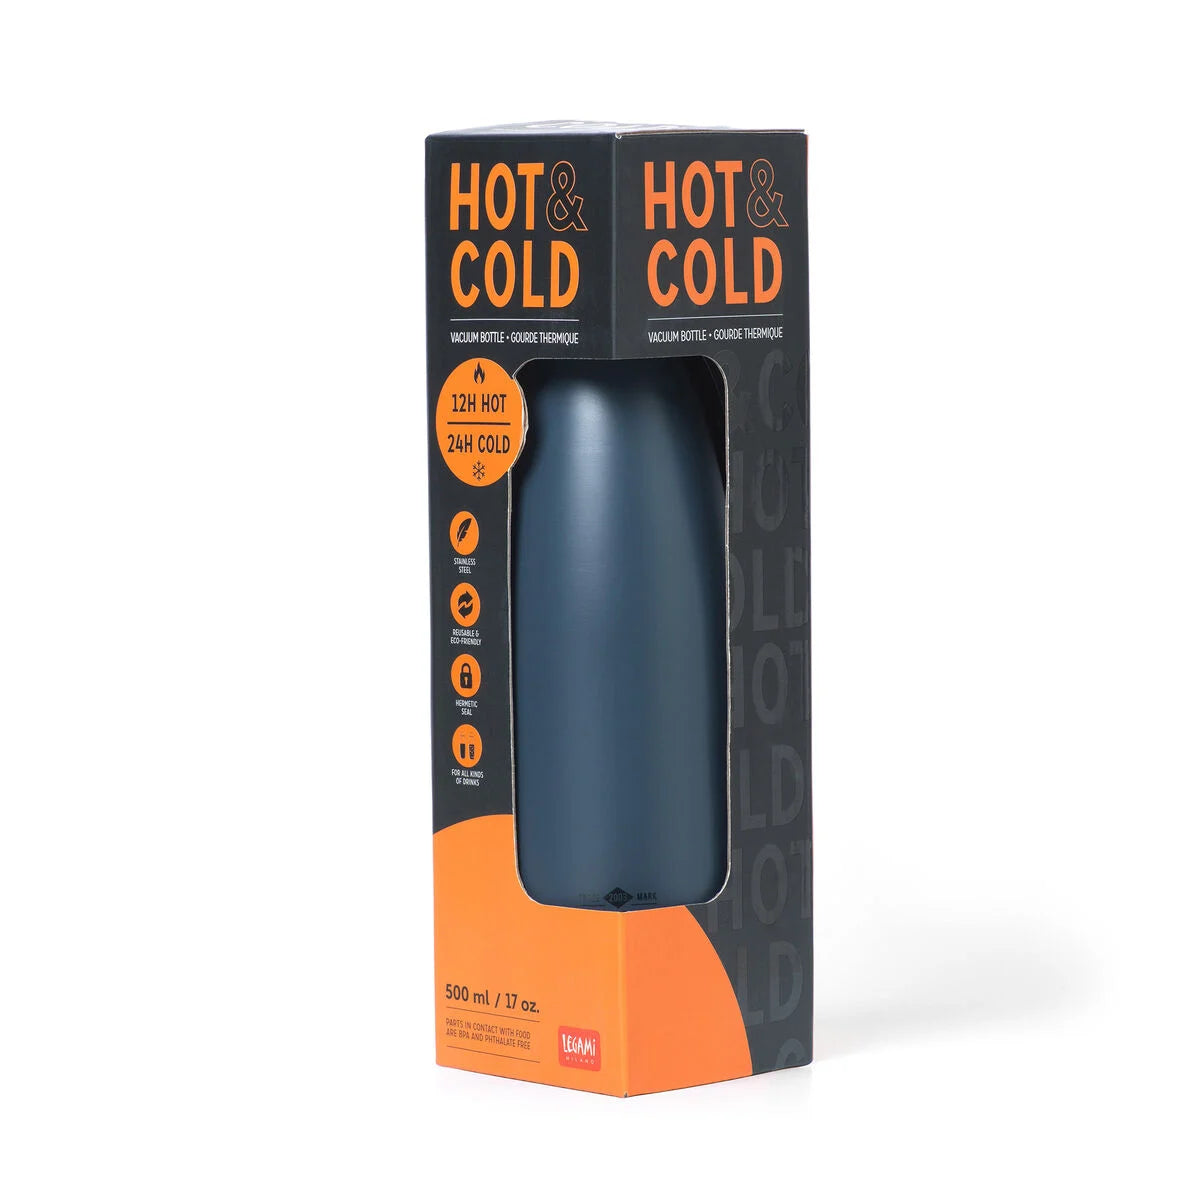 Fab Gifts | Legami Hot & Cold Vacuum Bottle Black 500mL by Weirs of Baggot Street